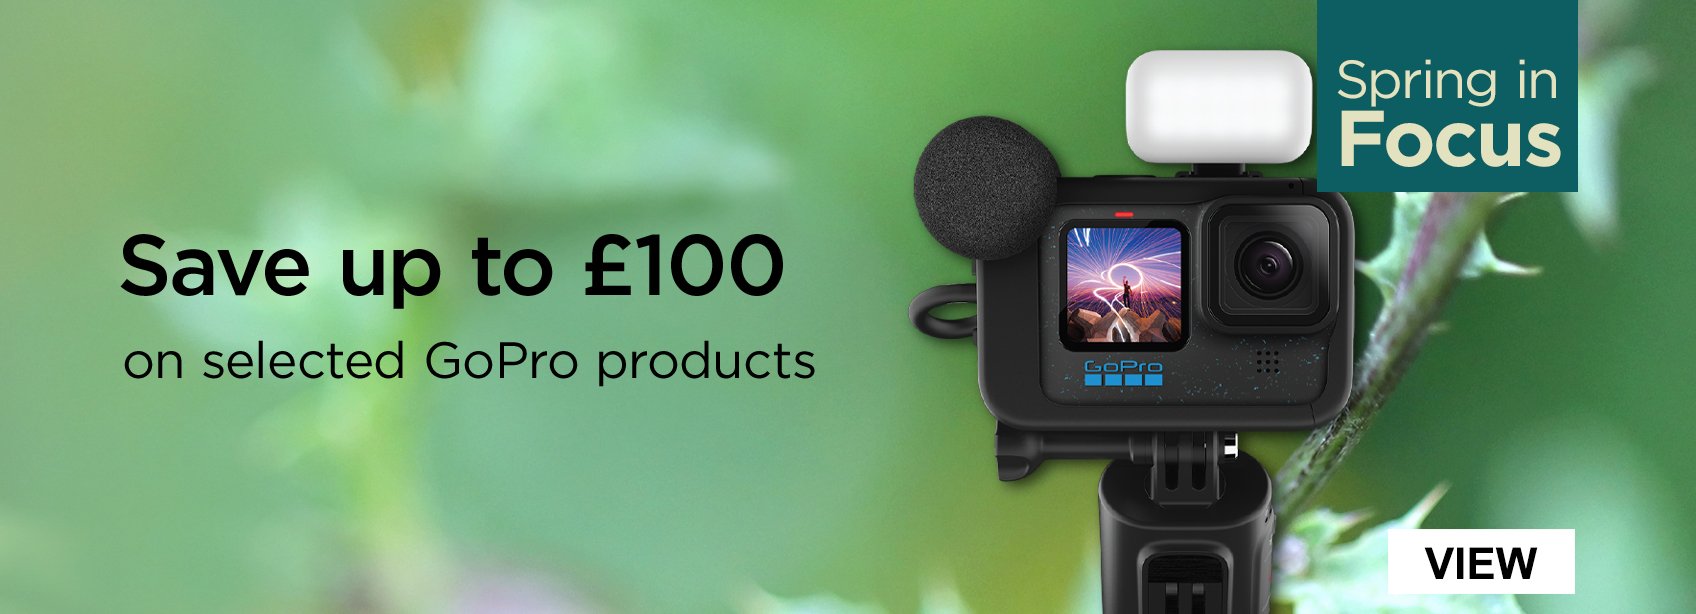 Save up to £100 on selected GoPro products